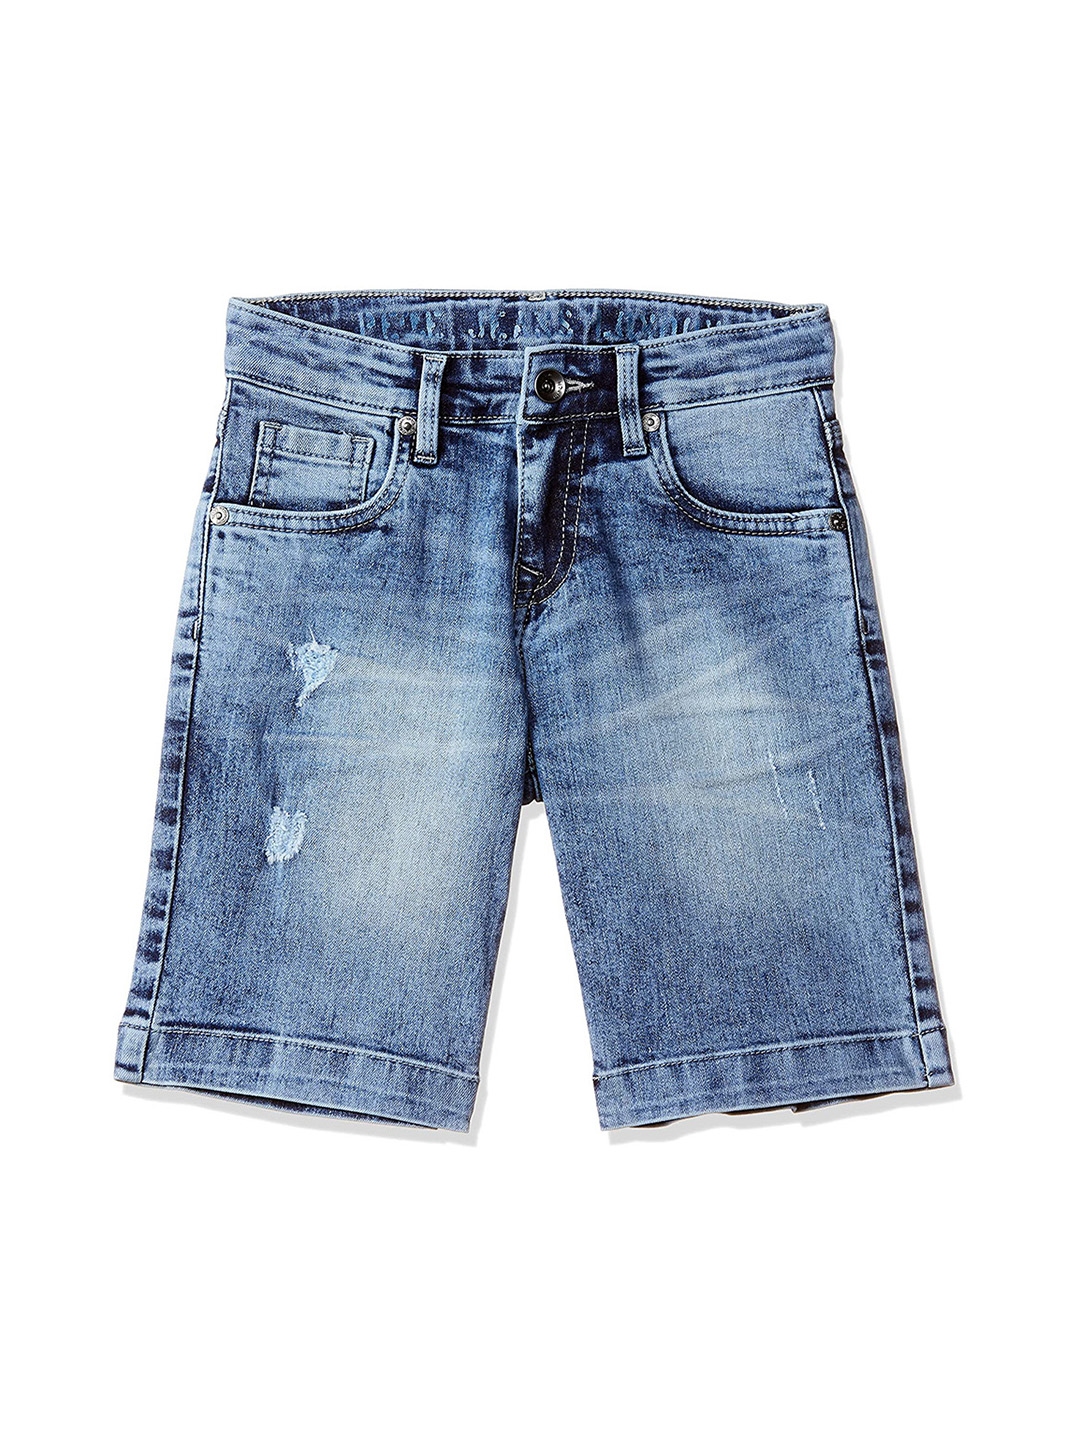 Buy Pepe Jeans Boys Blue Washed Mid Rise Denim Shorts - Shorts for Boys ...